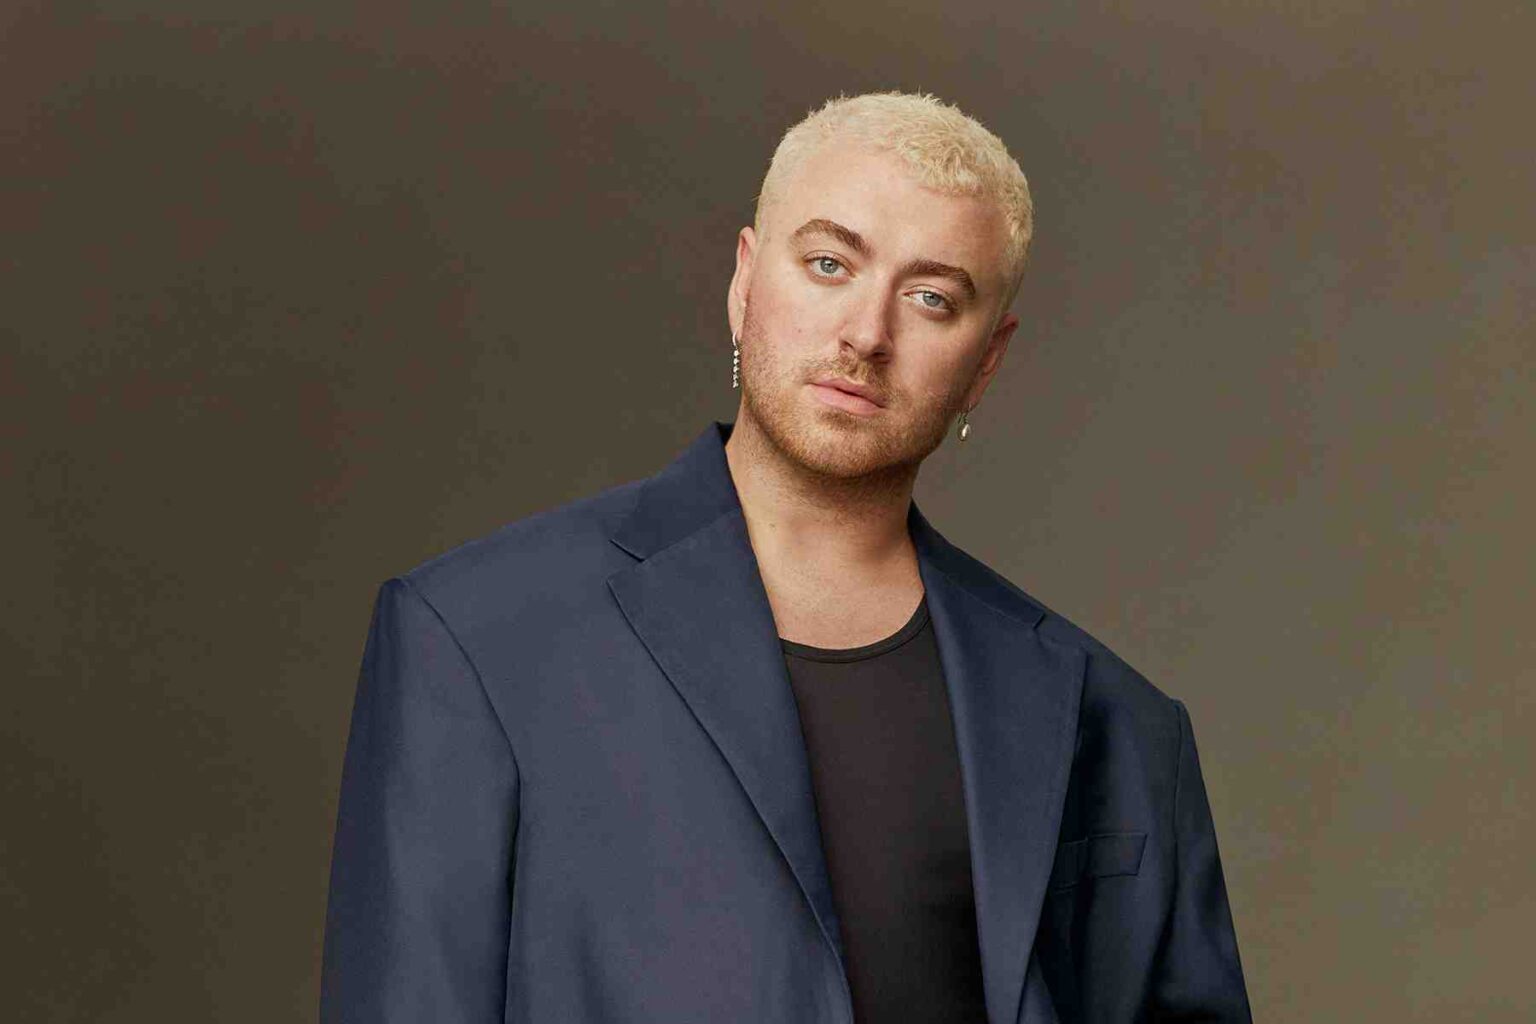 Sam Smith's punk runway strut at Paris Fashion Week stirred real buzz. But can they vamp their way to the Grammys or will their fashion disruption hit a sour note? Read on!